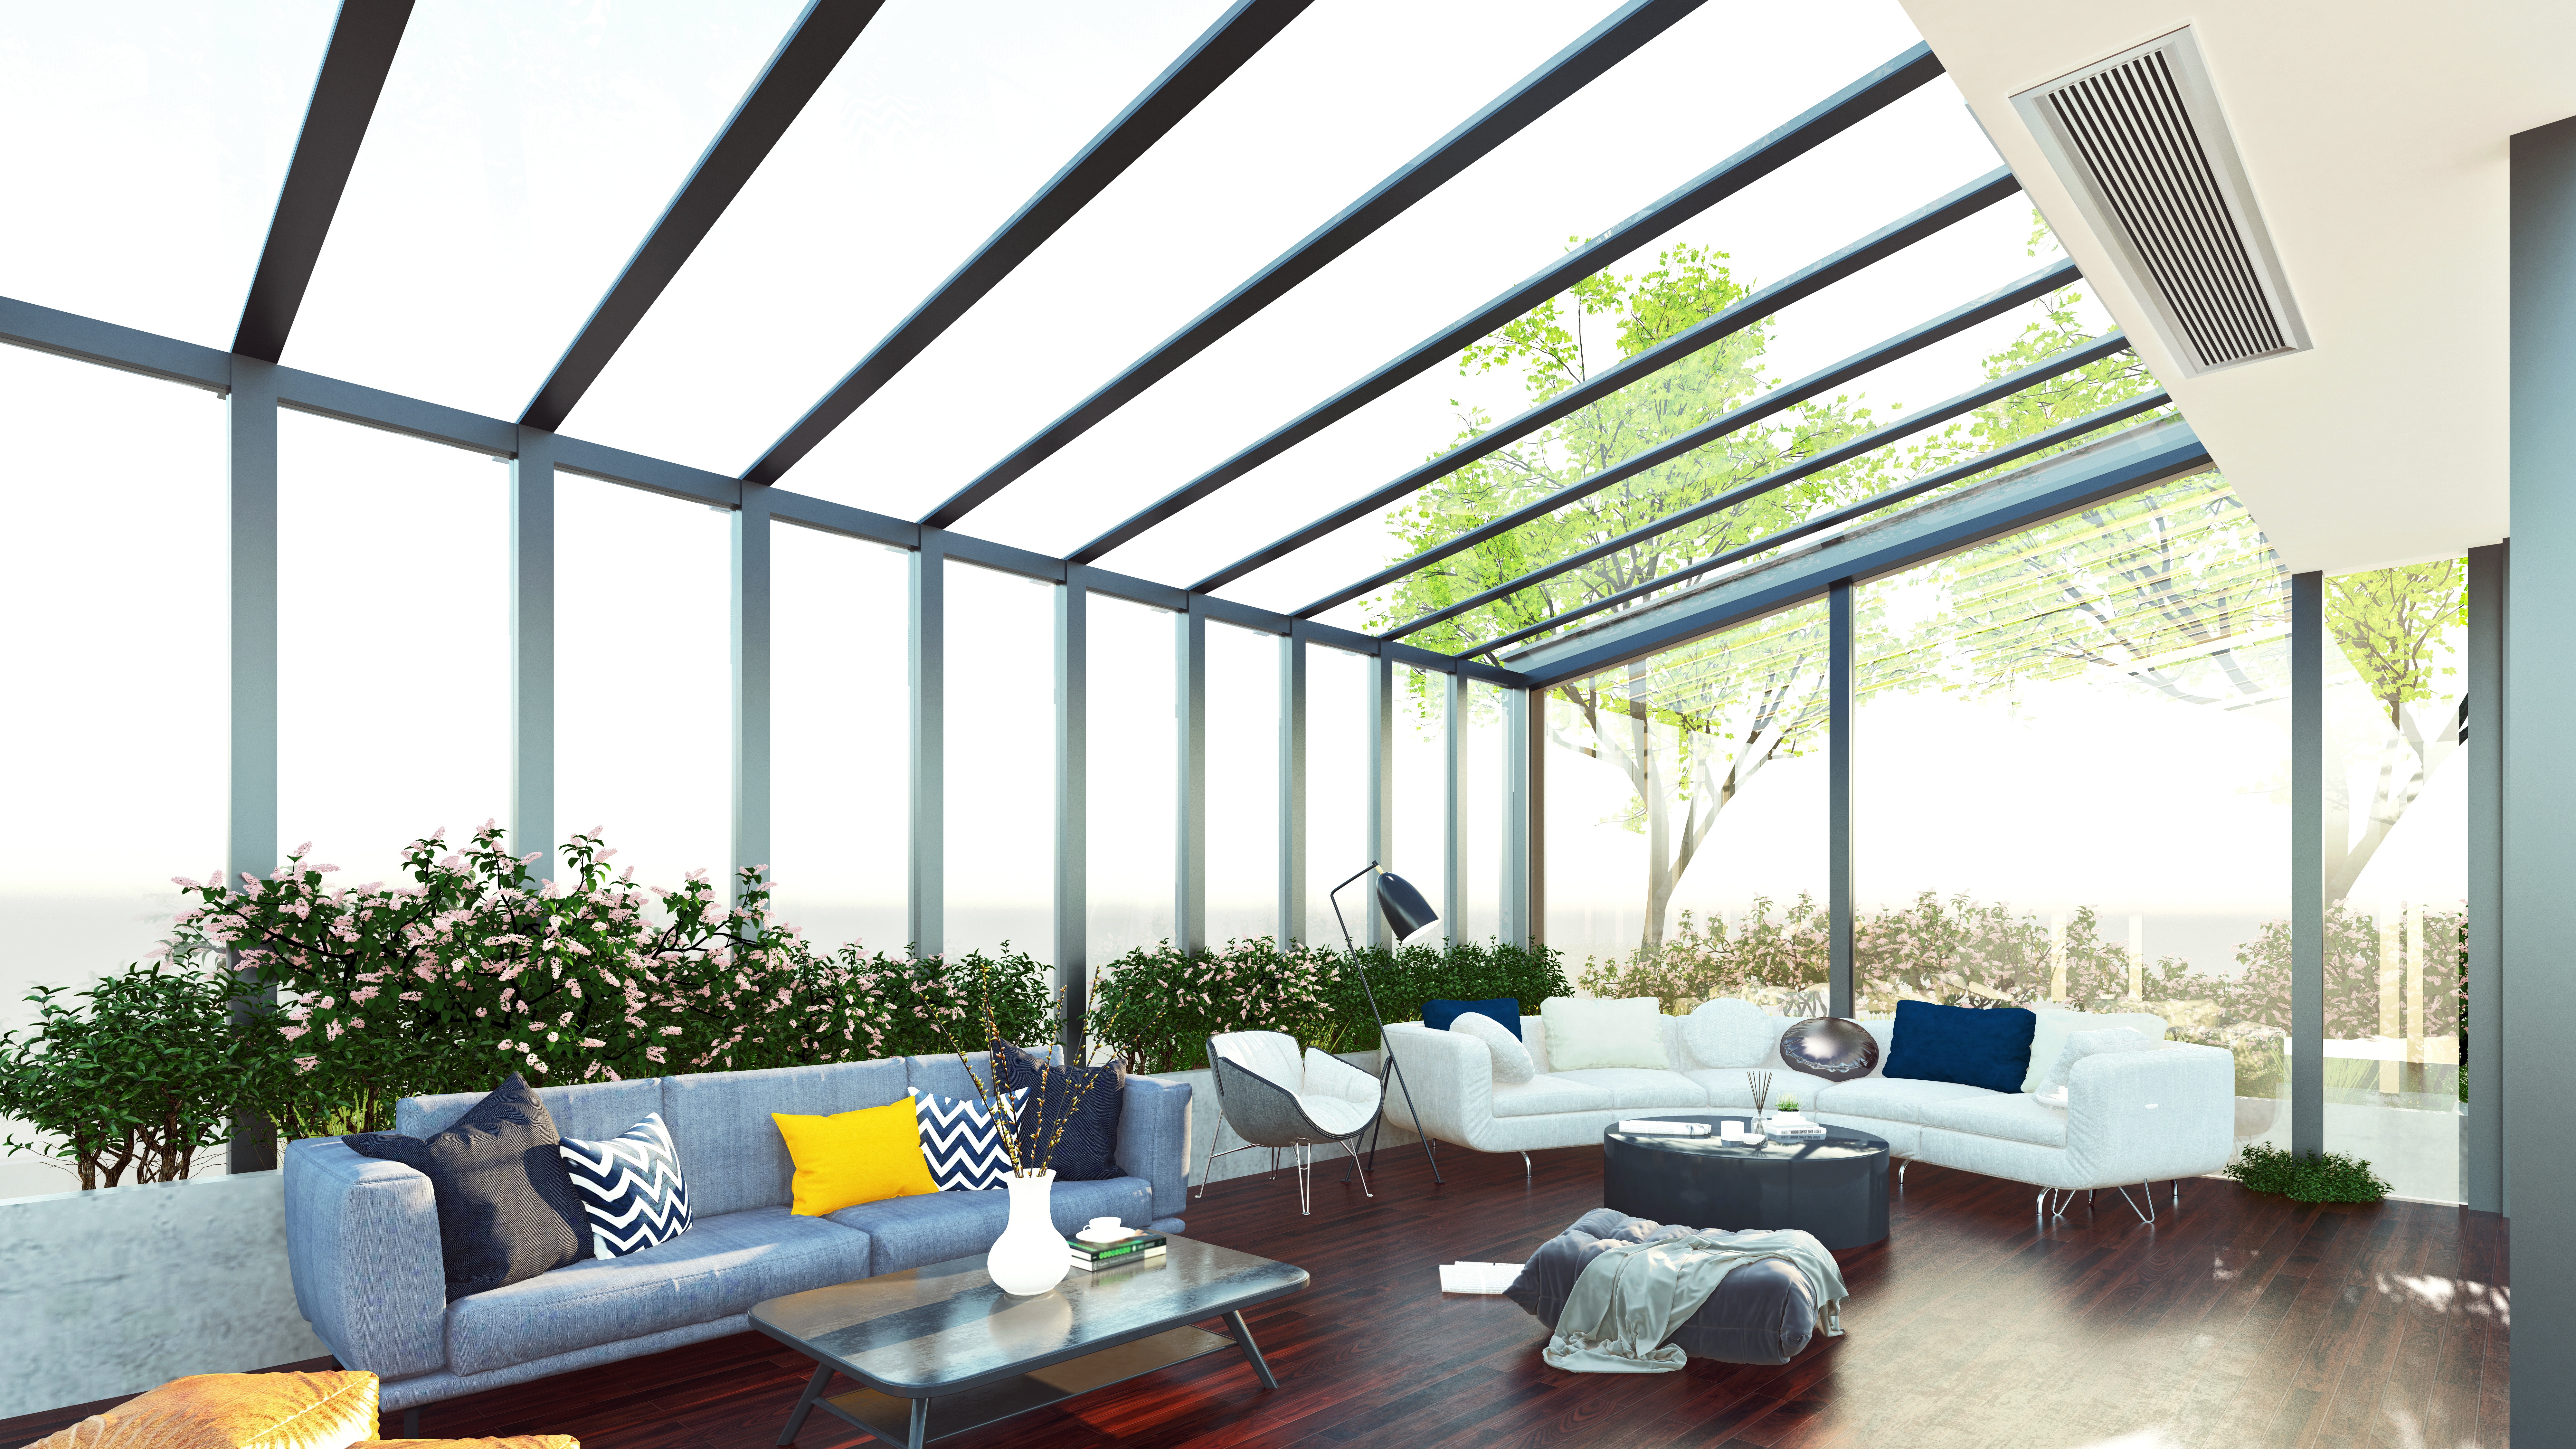 A sunroom with glass walls and ceiling with several couches